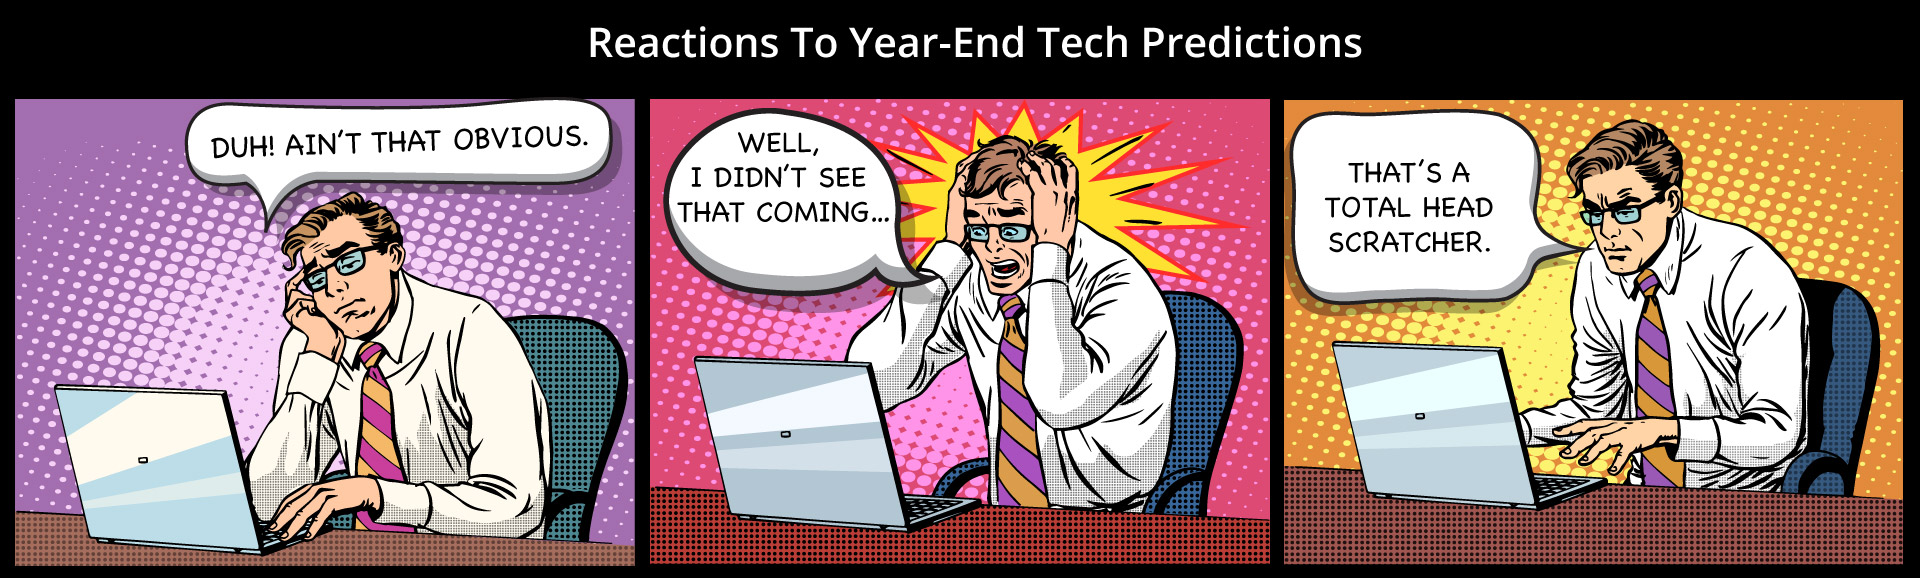 Analyst Predictions: How IT Pros React